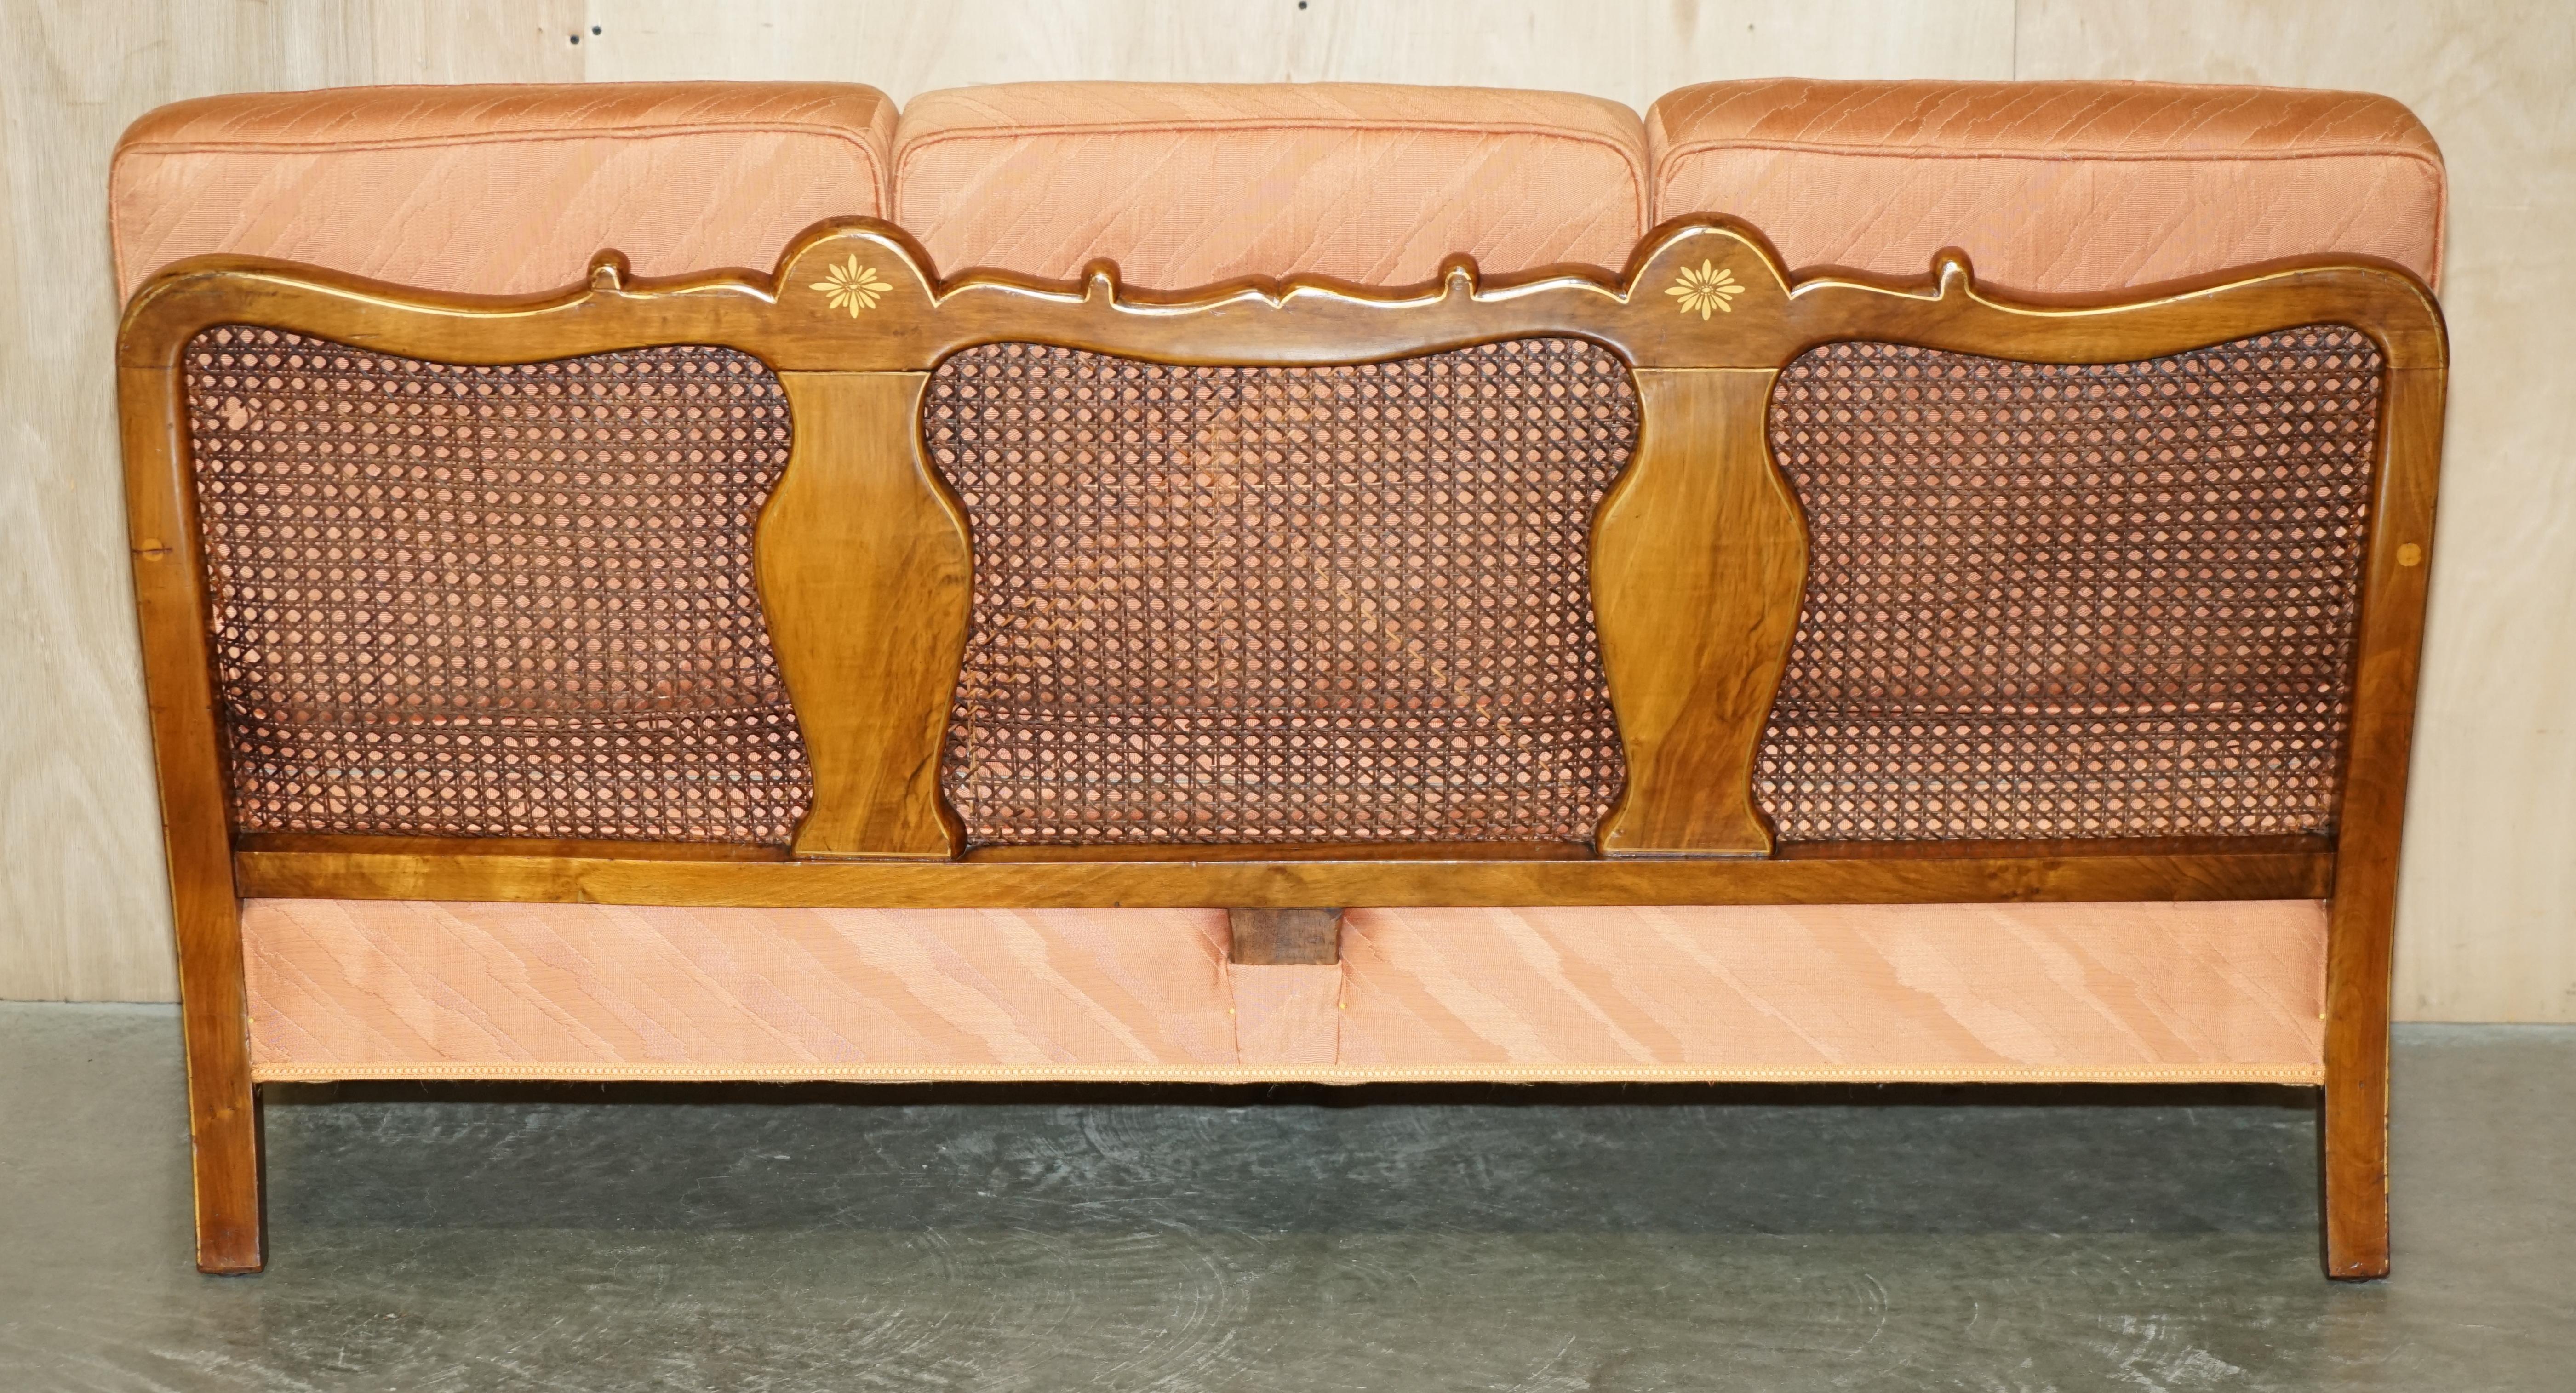 1920's WALNUT & CHINOISERIE 3 PIECE BERGERE SOFA ARMCHAIR SUITE FOR RESTORATION For Sale 4